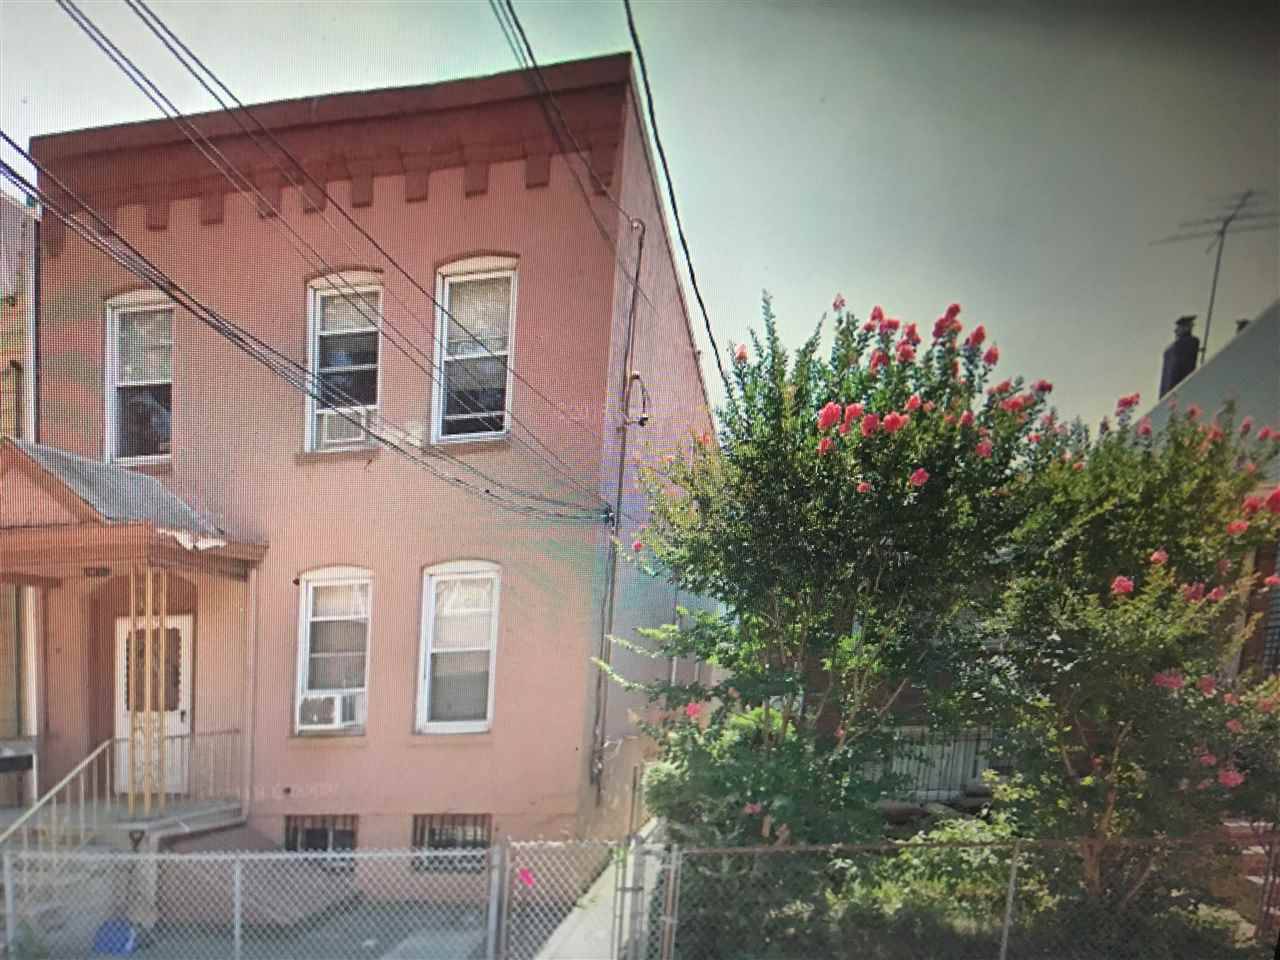 247 CLENDENNY AVE Multi-Family New Jersey